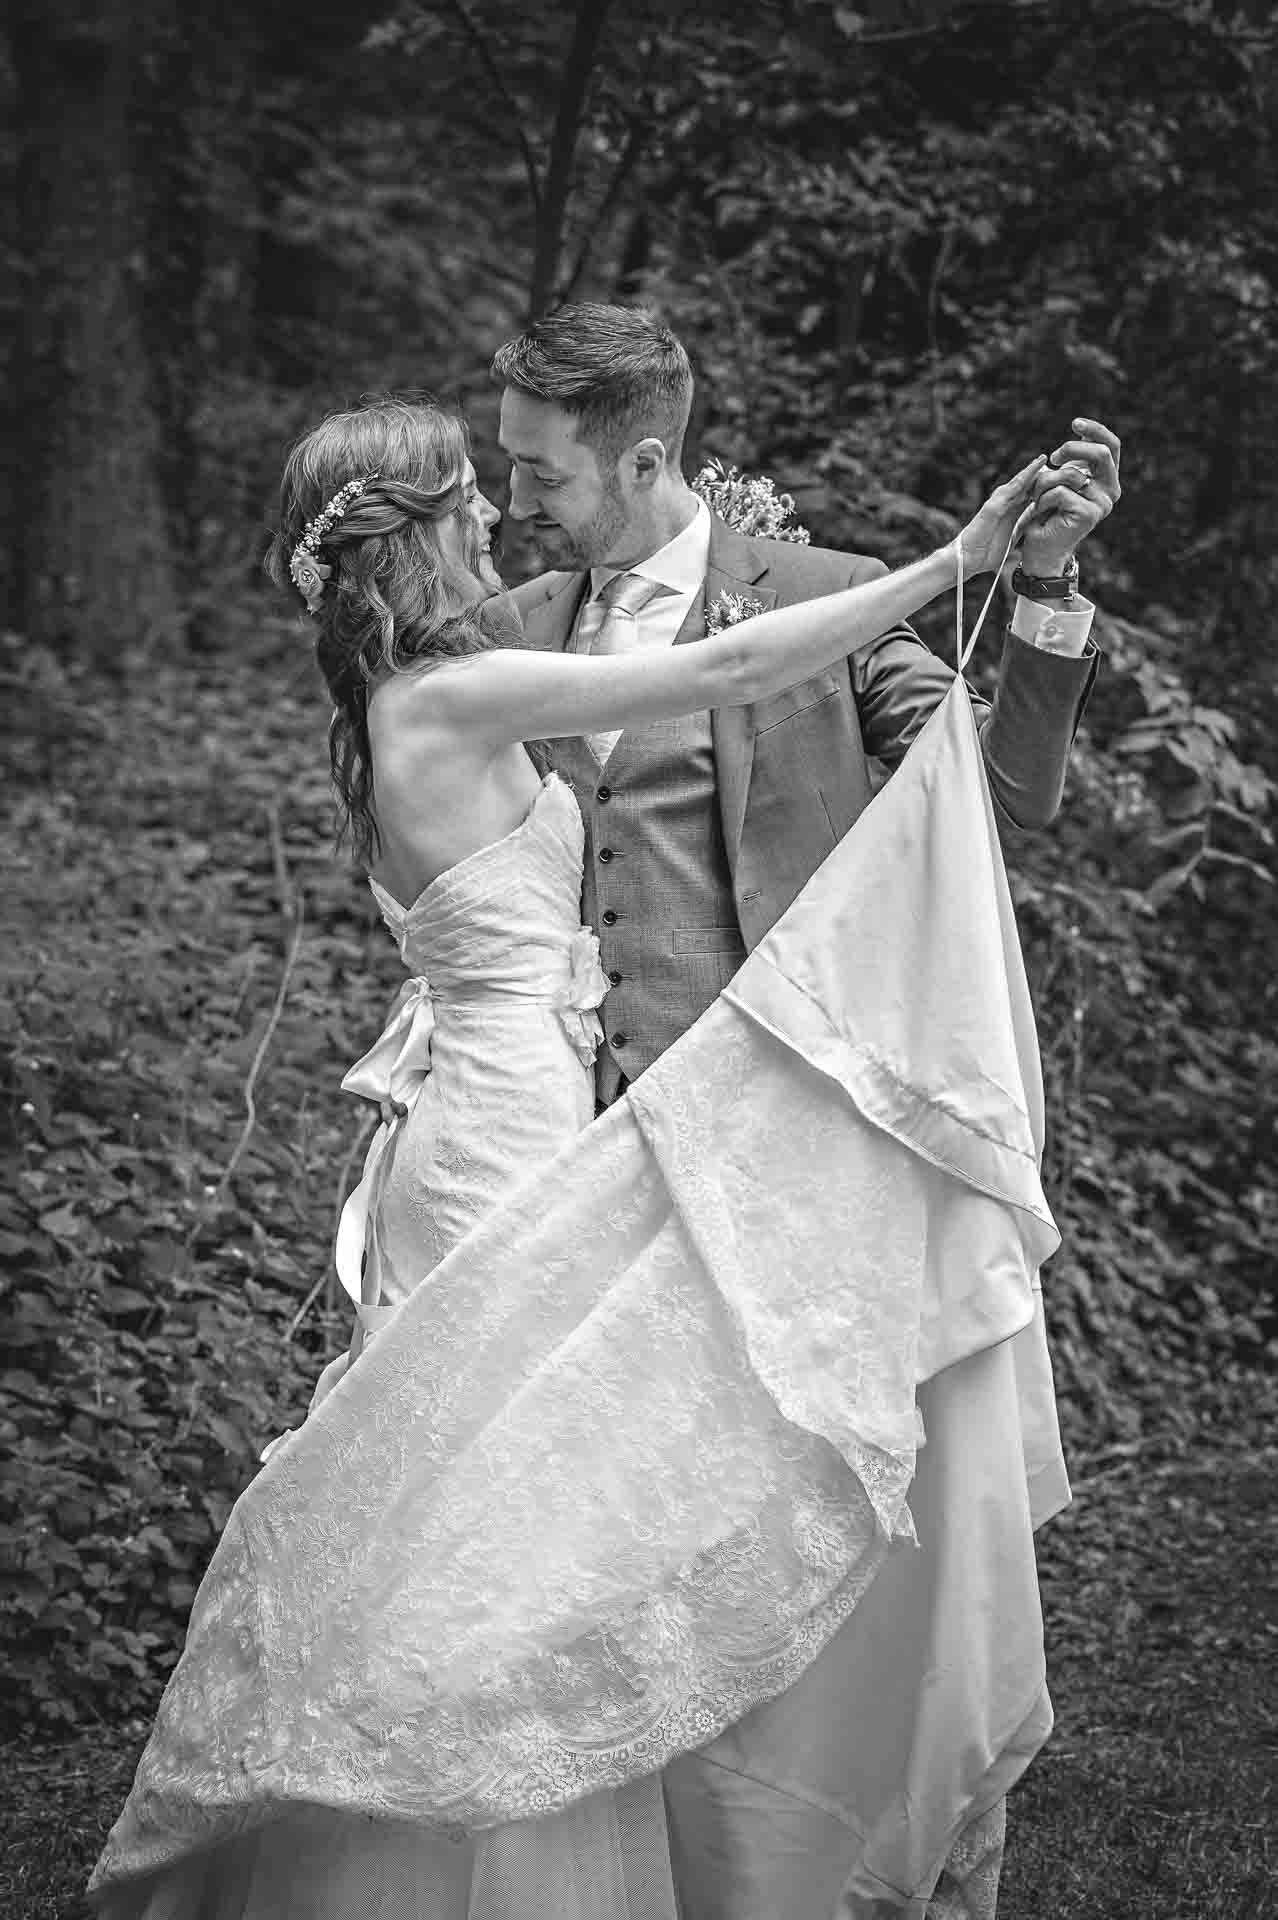 Bridal Couple Dancing in Woods